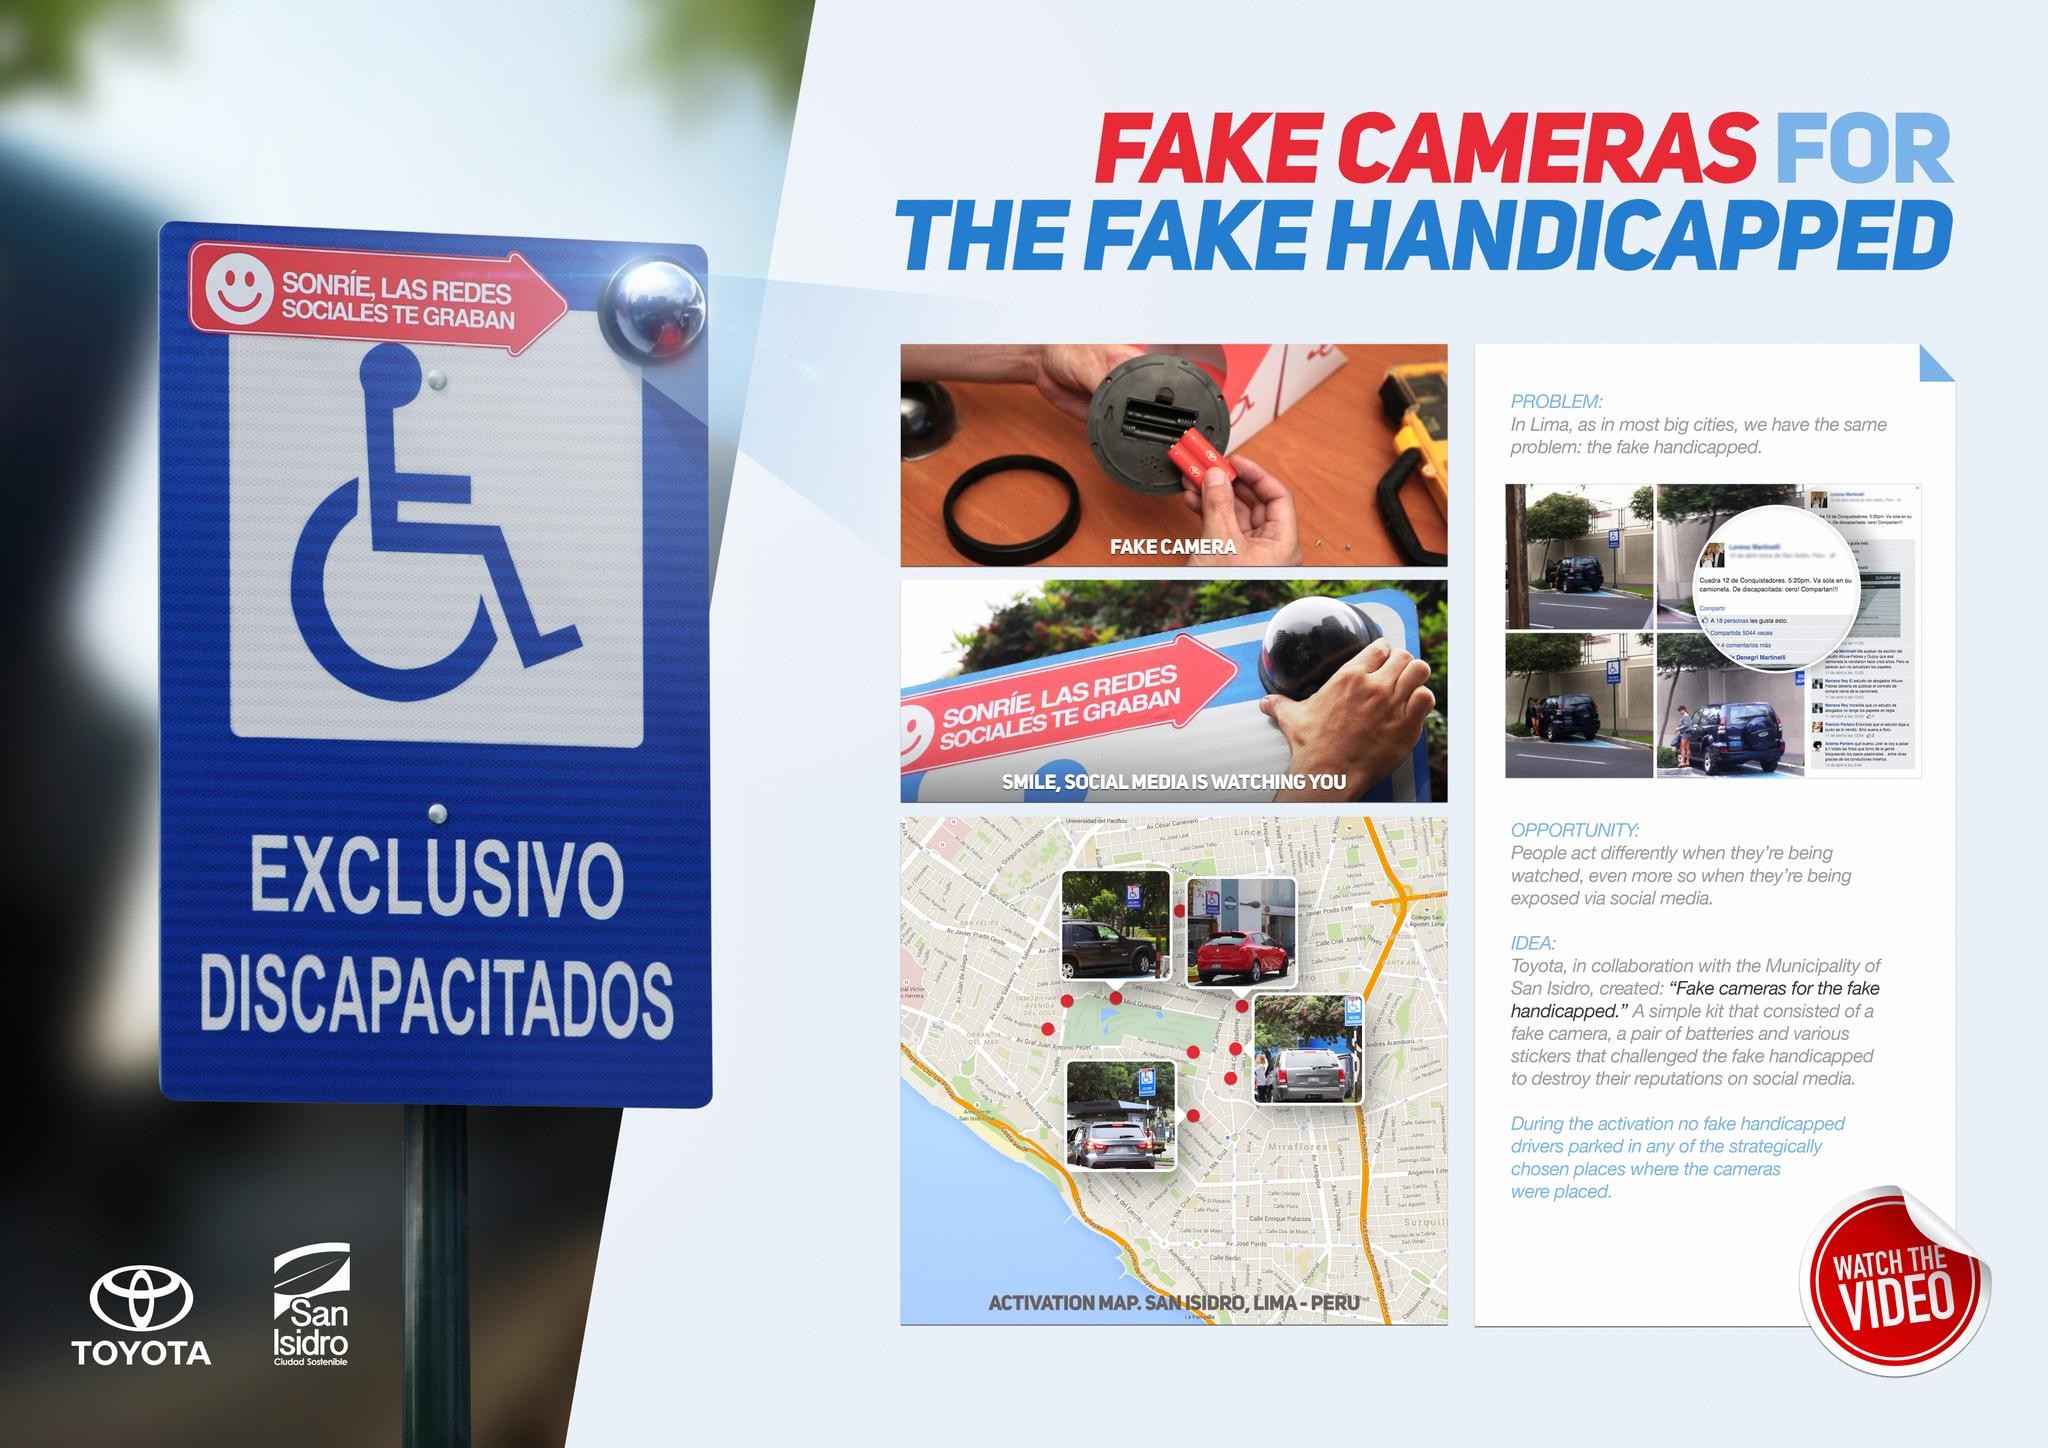 FAKE CAMERA FOR THE FAKE HANDICAPPED